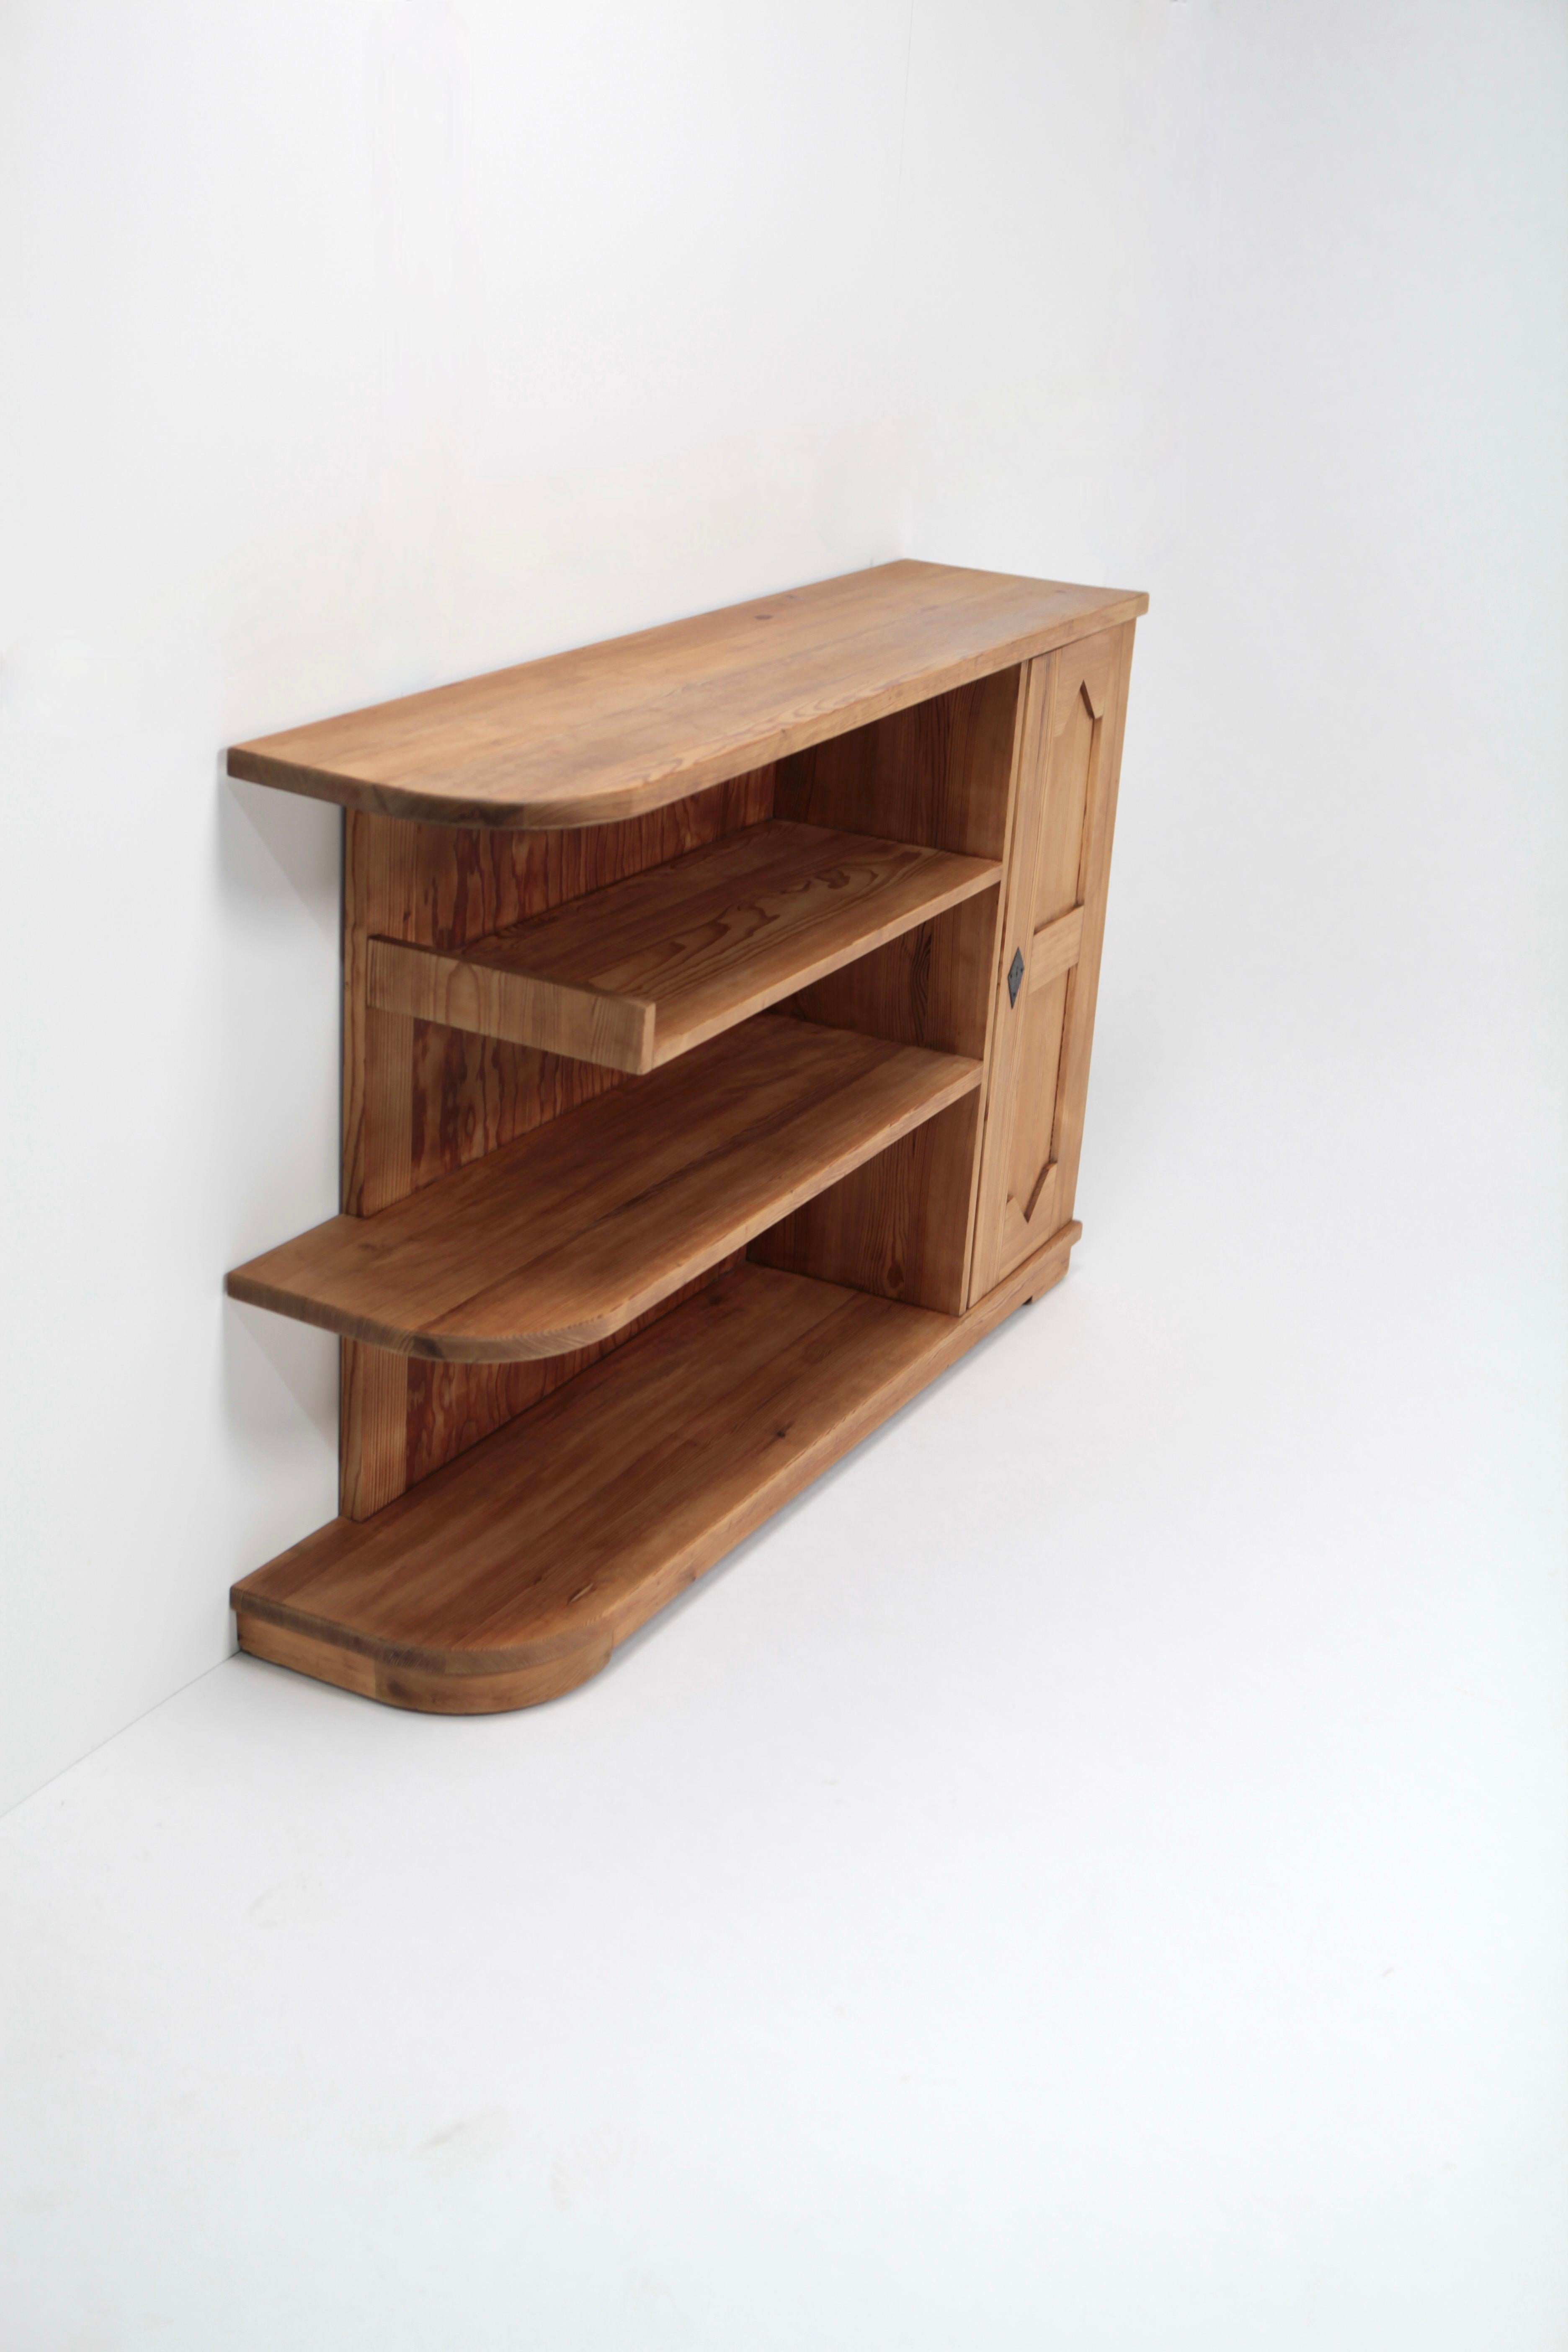 Axel Einar Hjorth, 'Lovö' Bookcase, Acid Stained Pine, Executed by NK in 1939 4